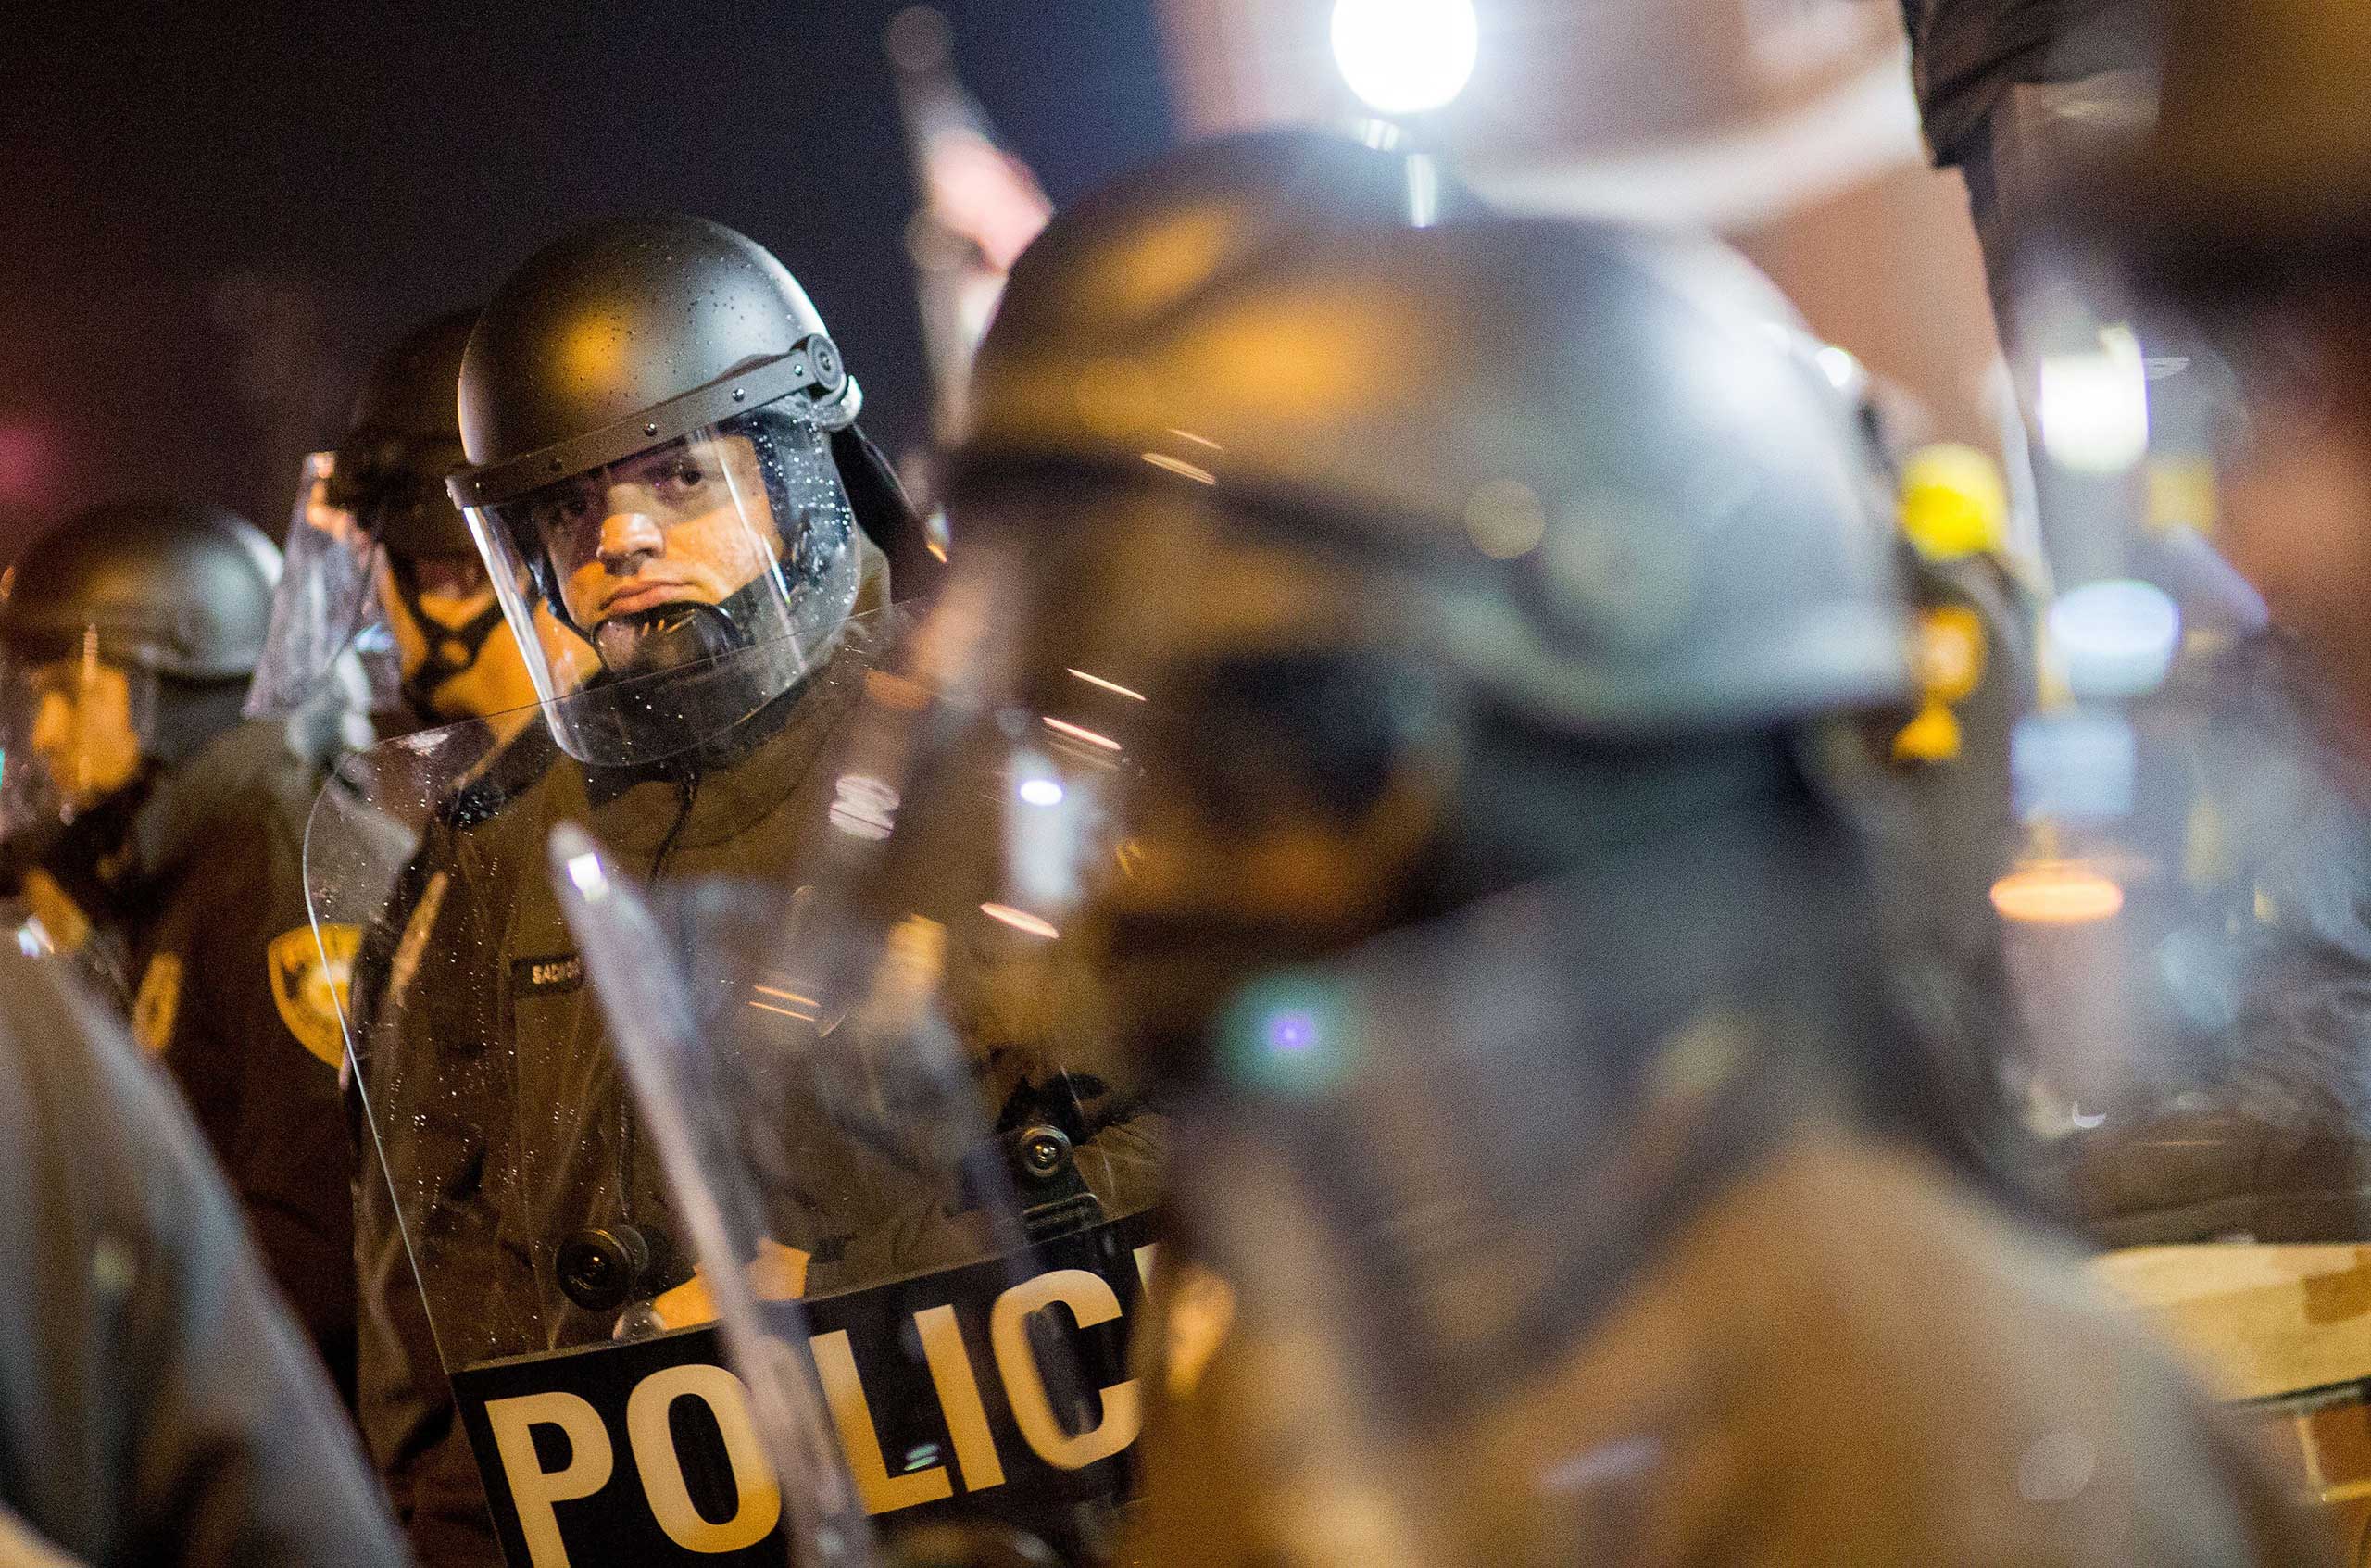 Police in riot gear observe protesters on the street near the Ferguson Police Station in Ferguson, Mo. on Nov. 23, 2014 (Shen Ting—Xinhua Press/Corbis)